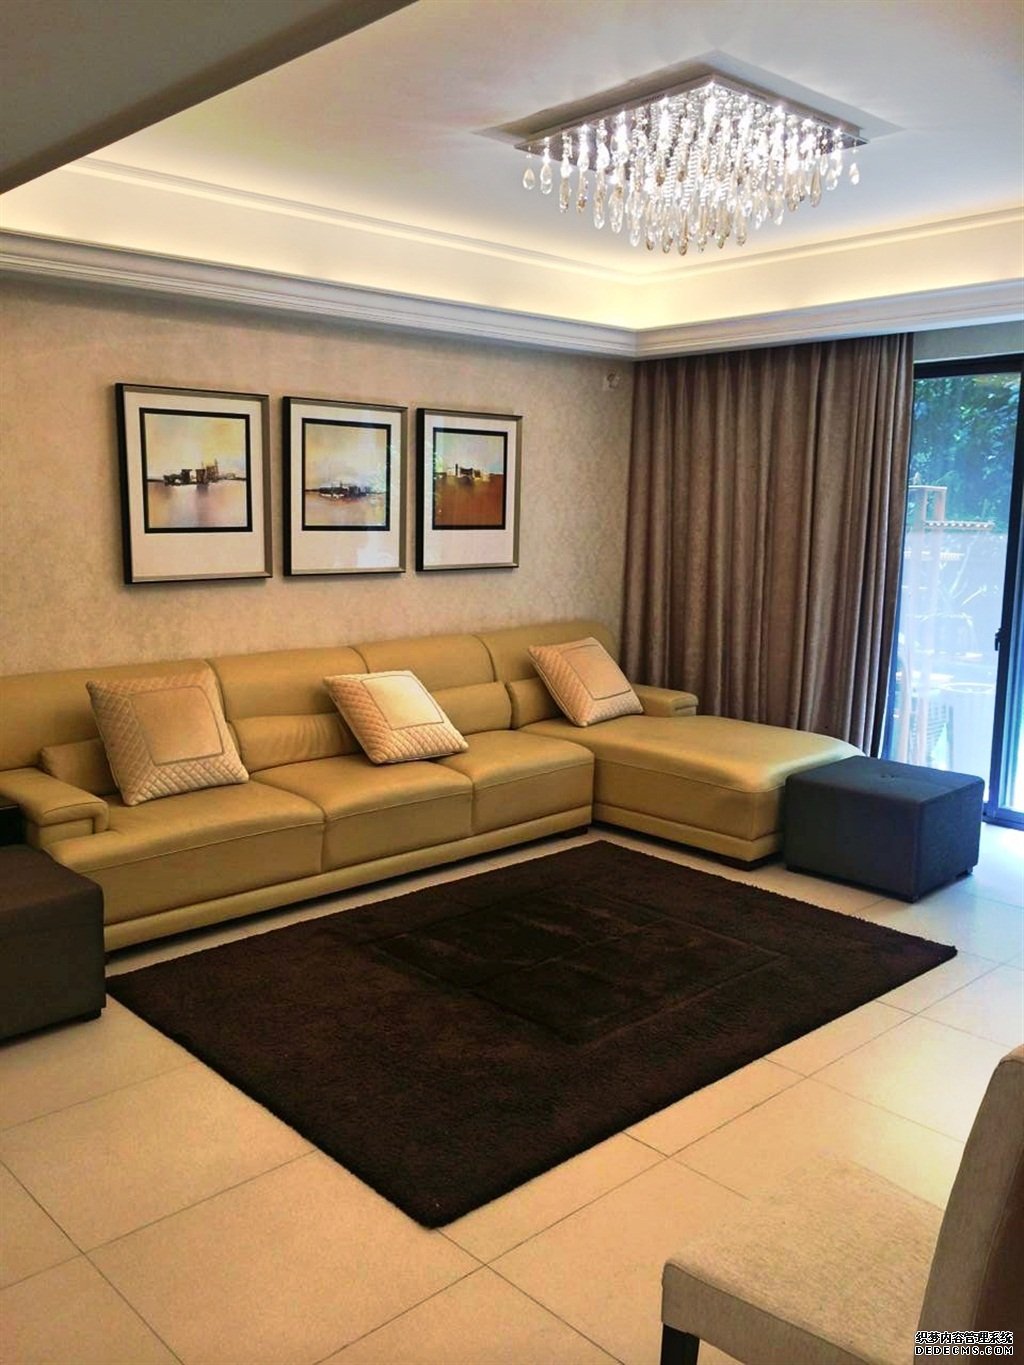  Big 3BR Apartment with Private Garden near West Nanjing Rd